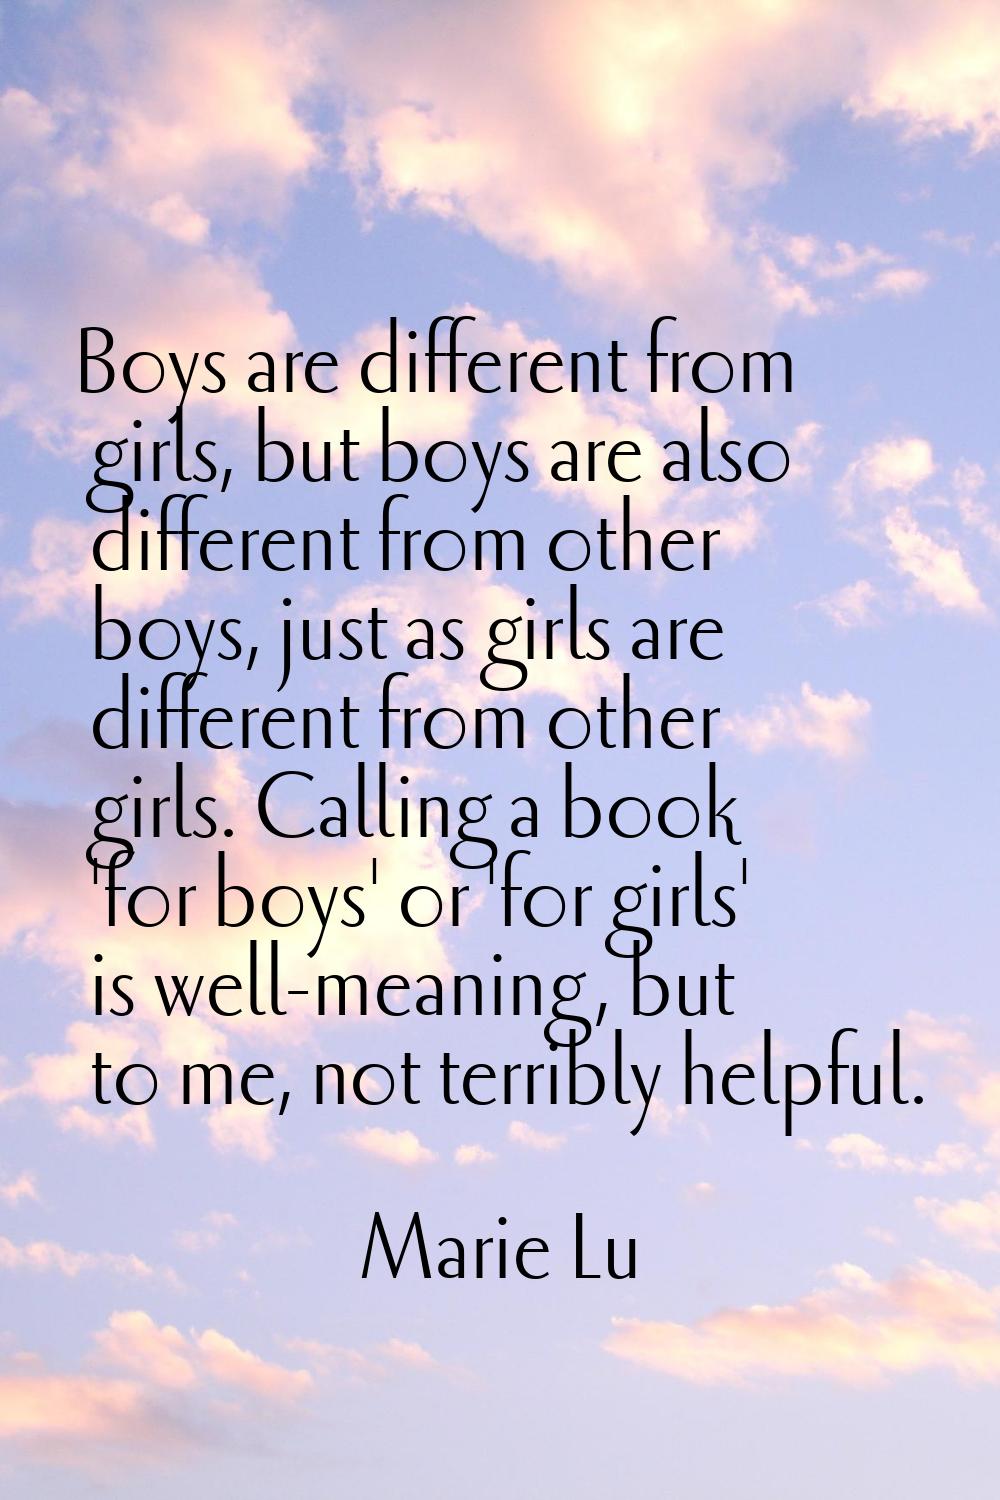 Boys are different from girls, but boys are also different from other boys, just as girls are diffe